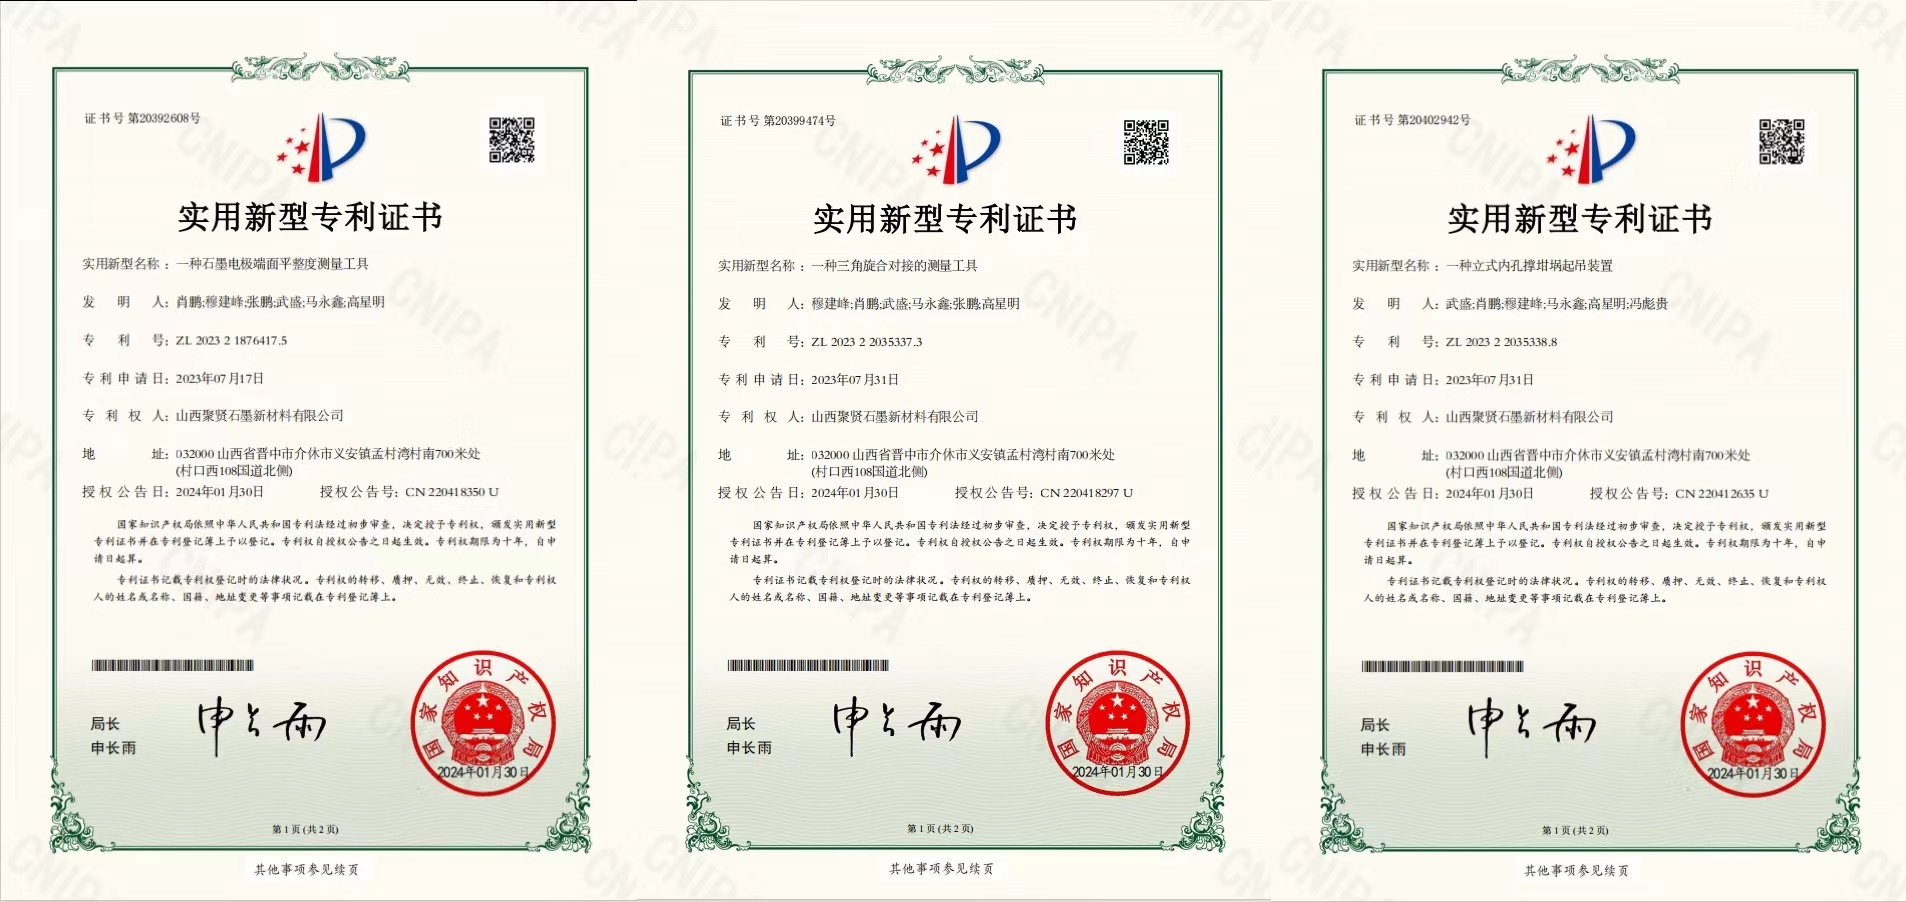 Congratulations to our company for obtaining three utility model patents